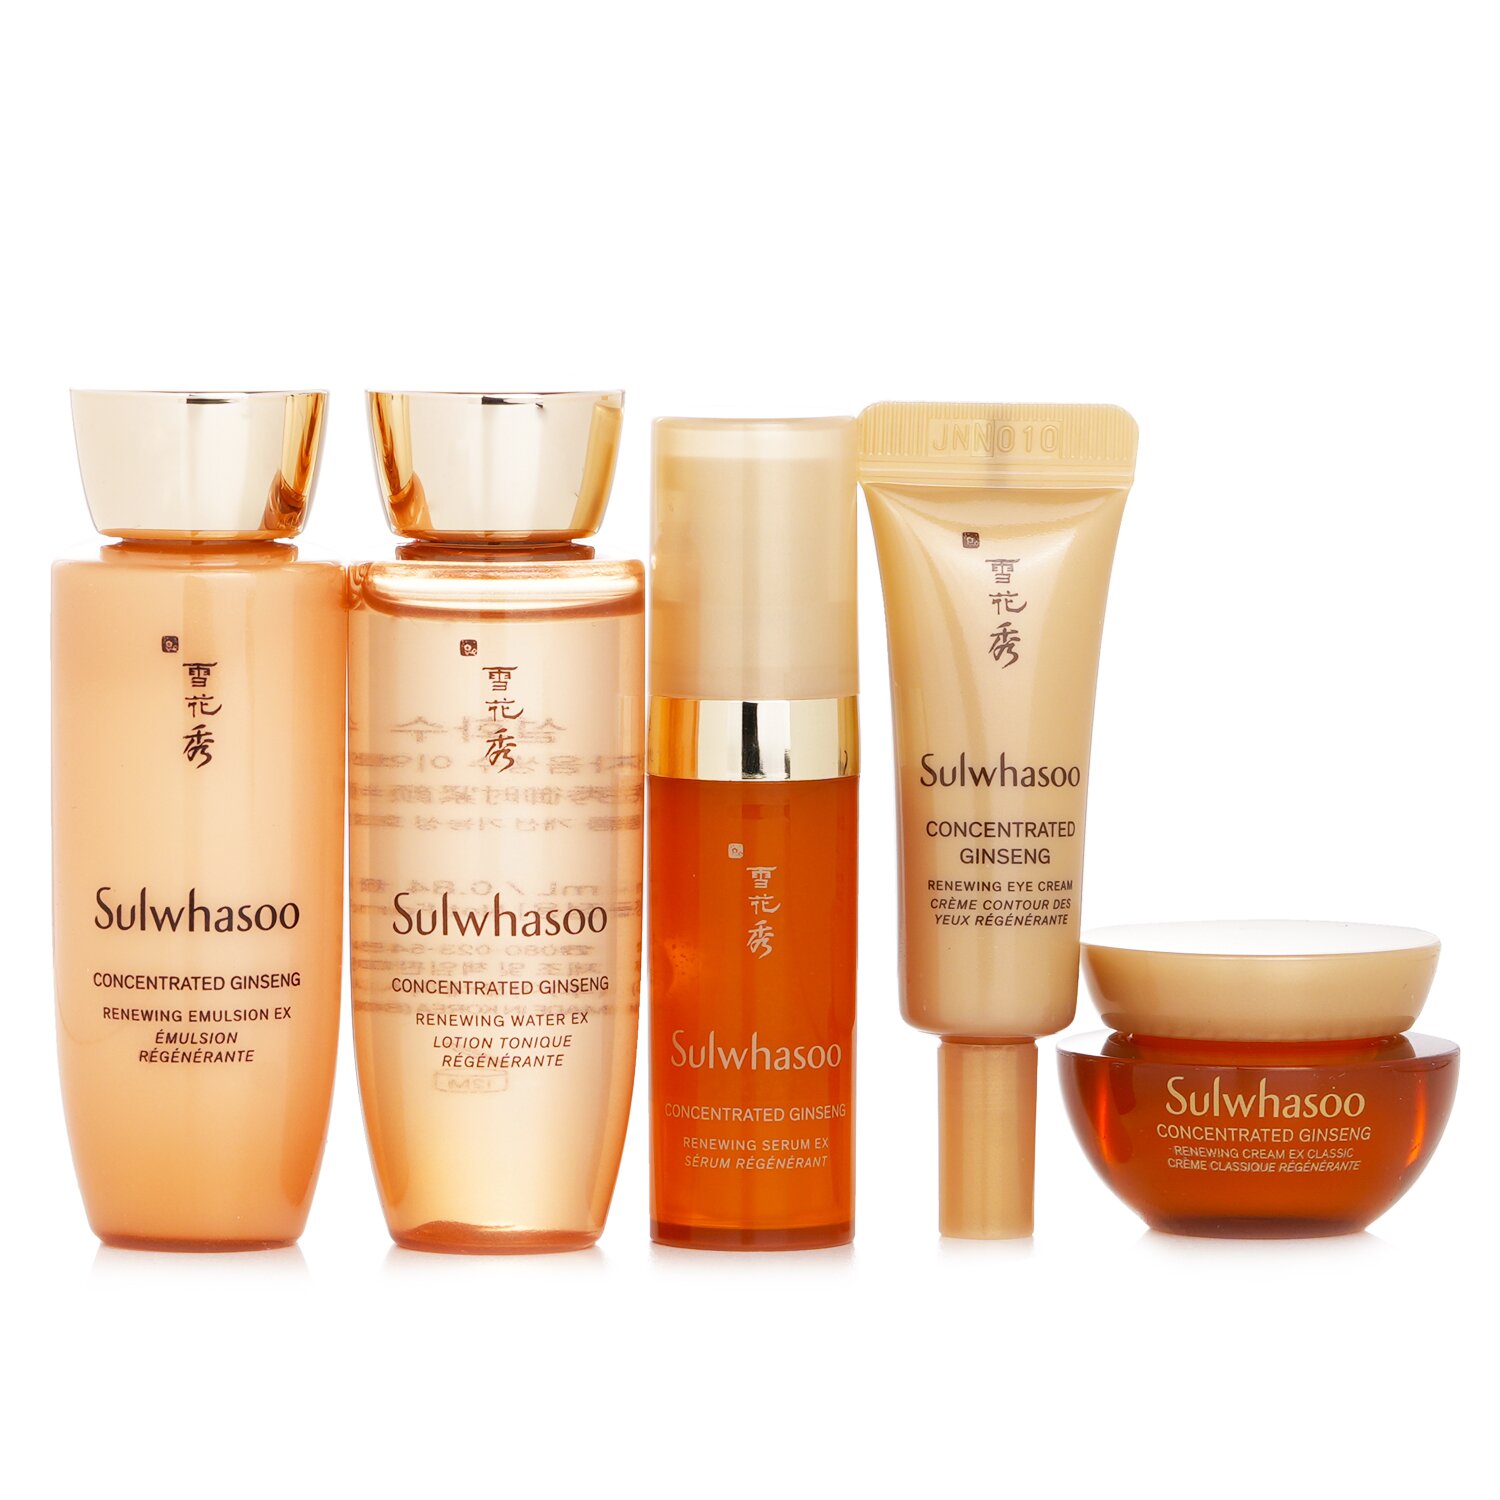 Sulwhasoo Concentrated Ginseng Anti Aging Set: 5pcs